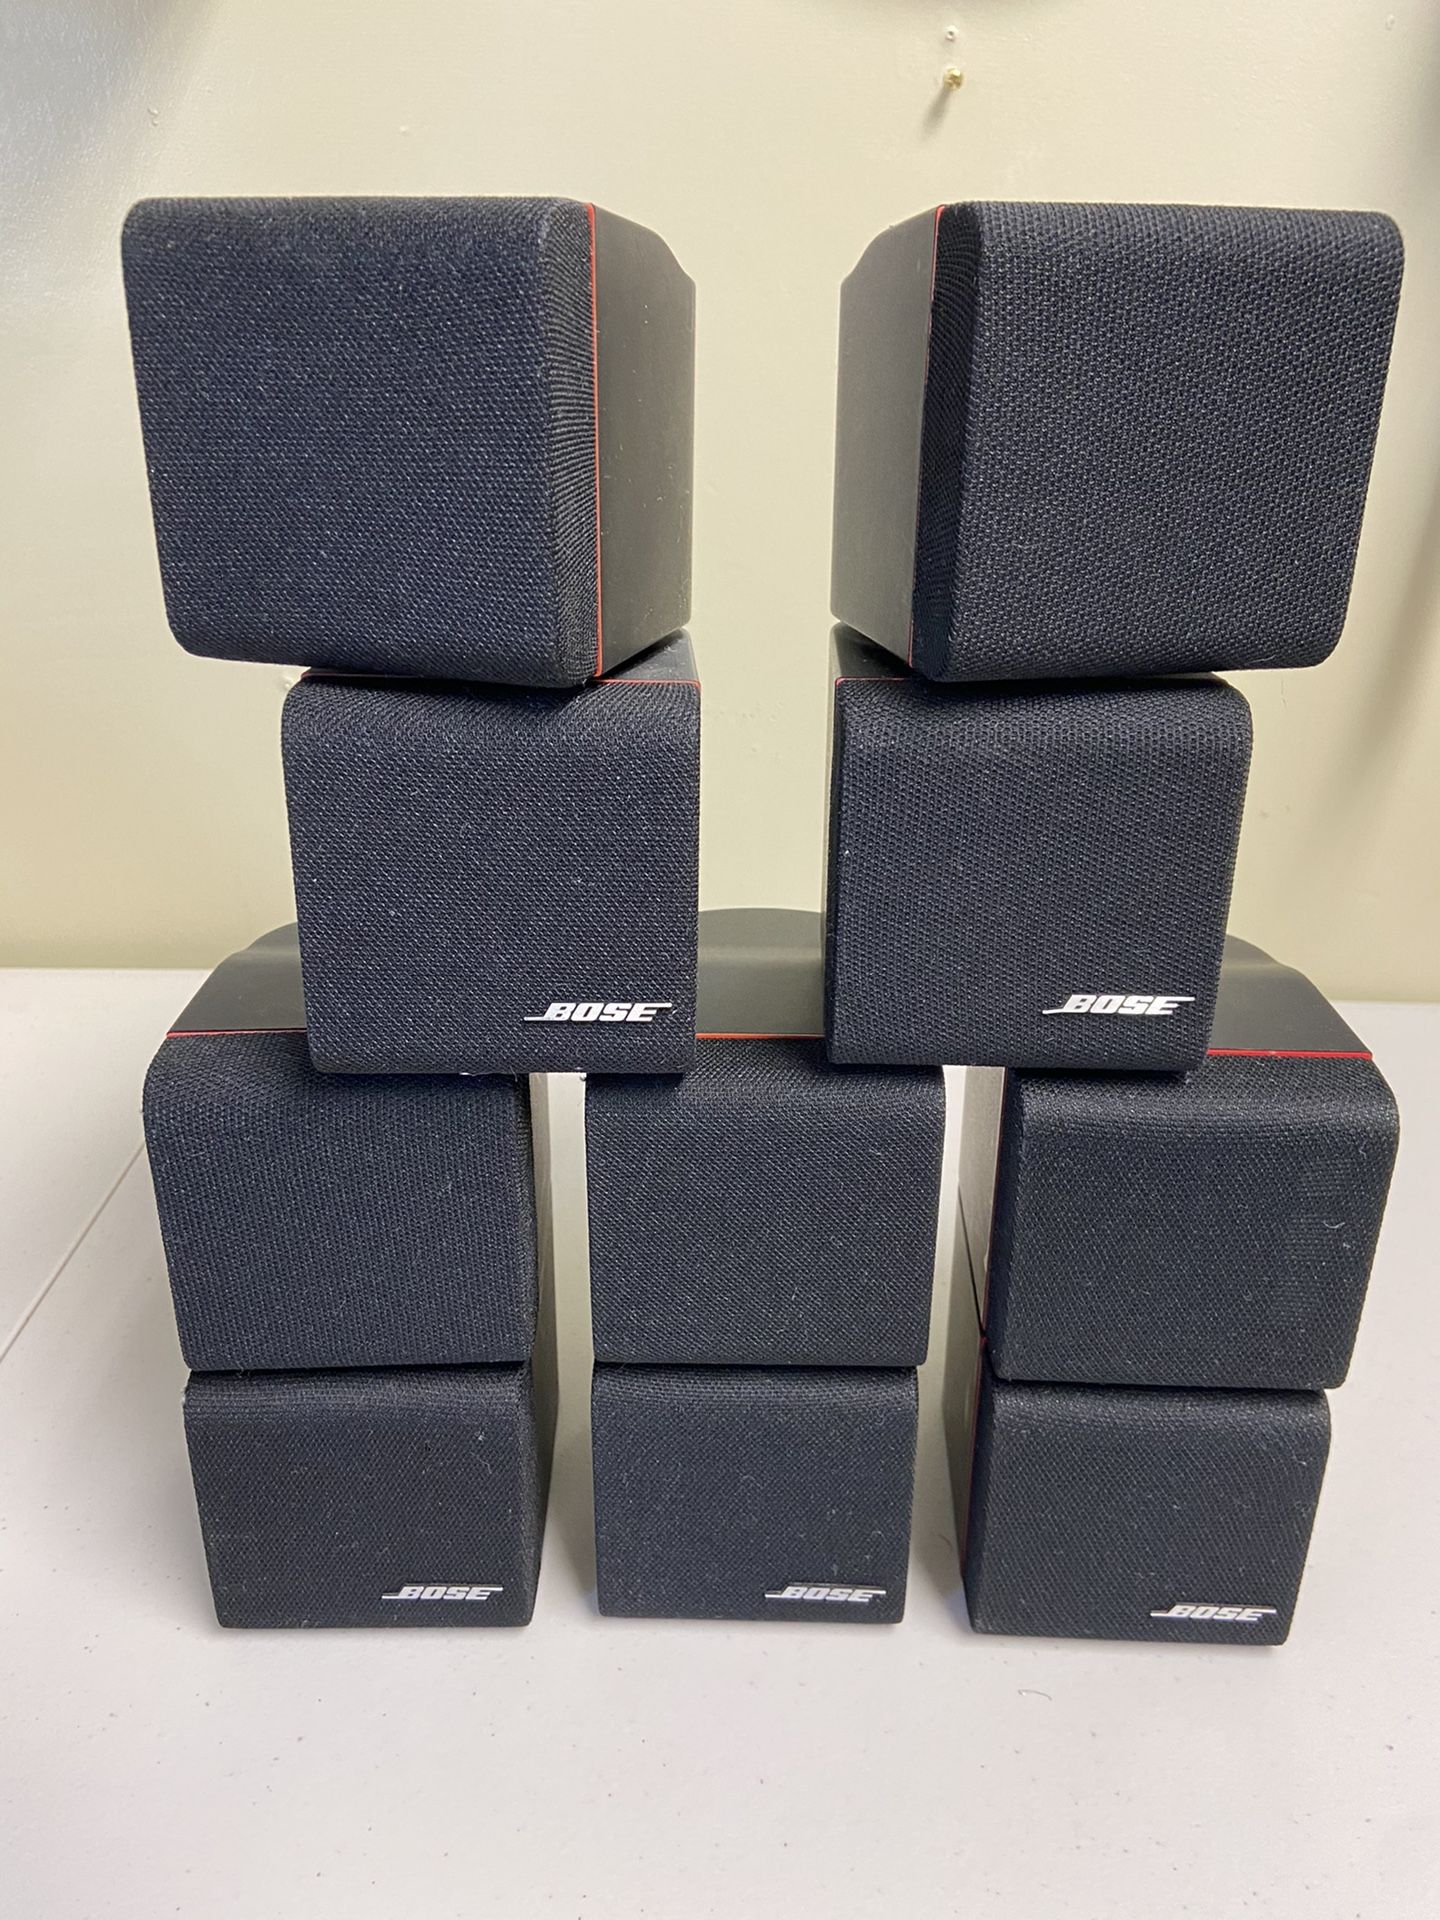 Bose Double Cubes Red Line speakers in excellent condition like new. 10 -200 watts amazing sound.